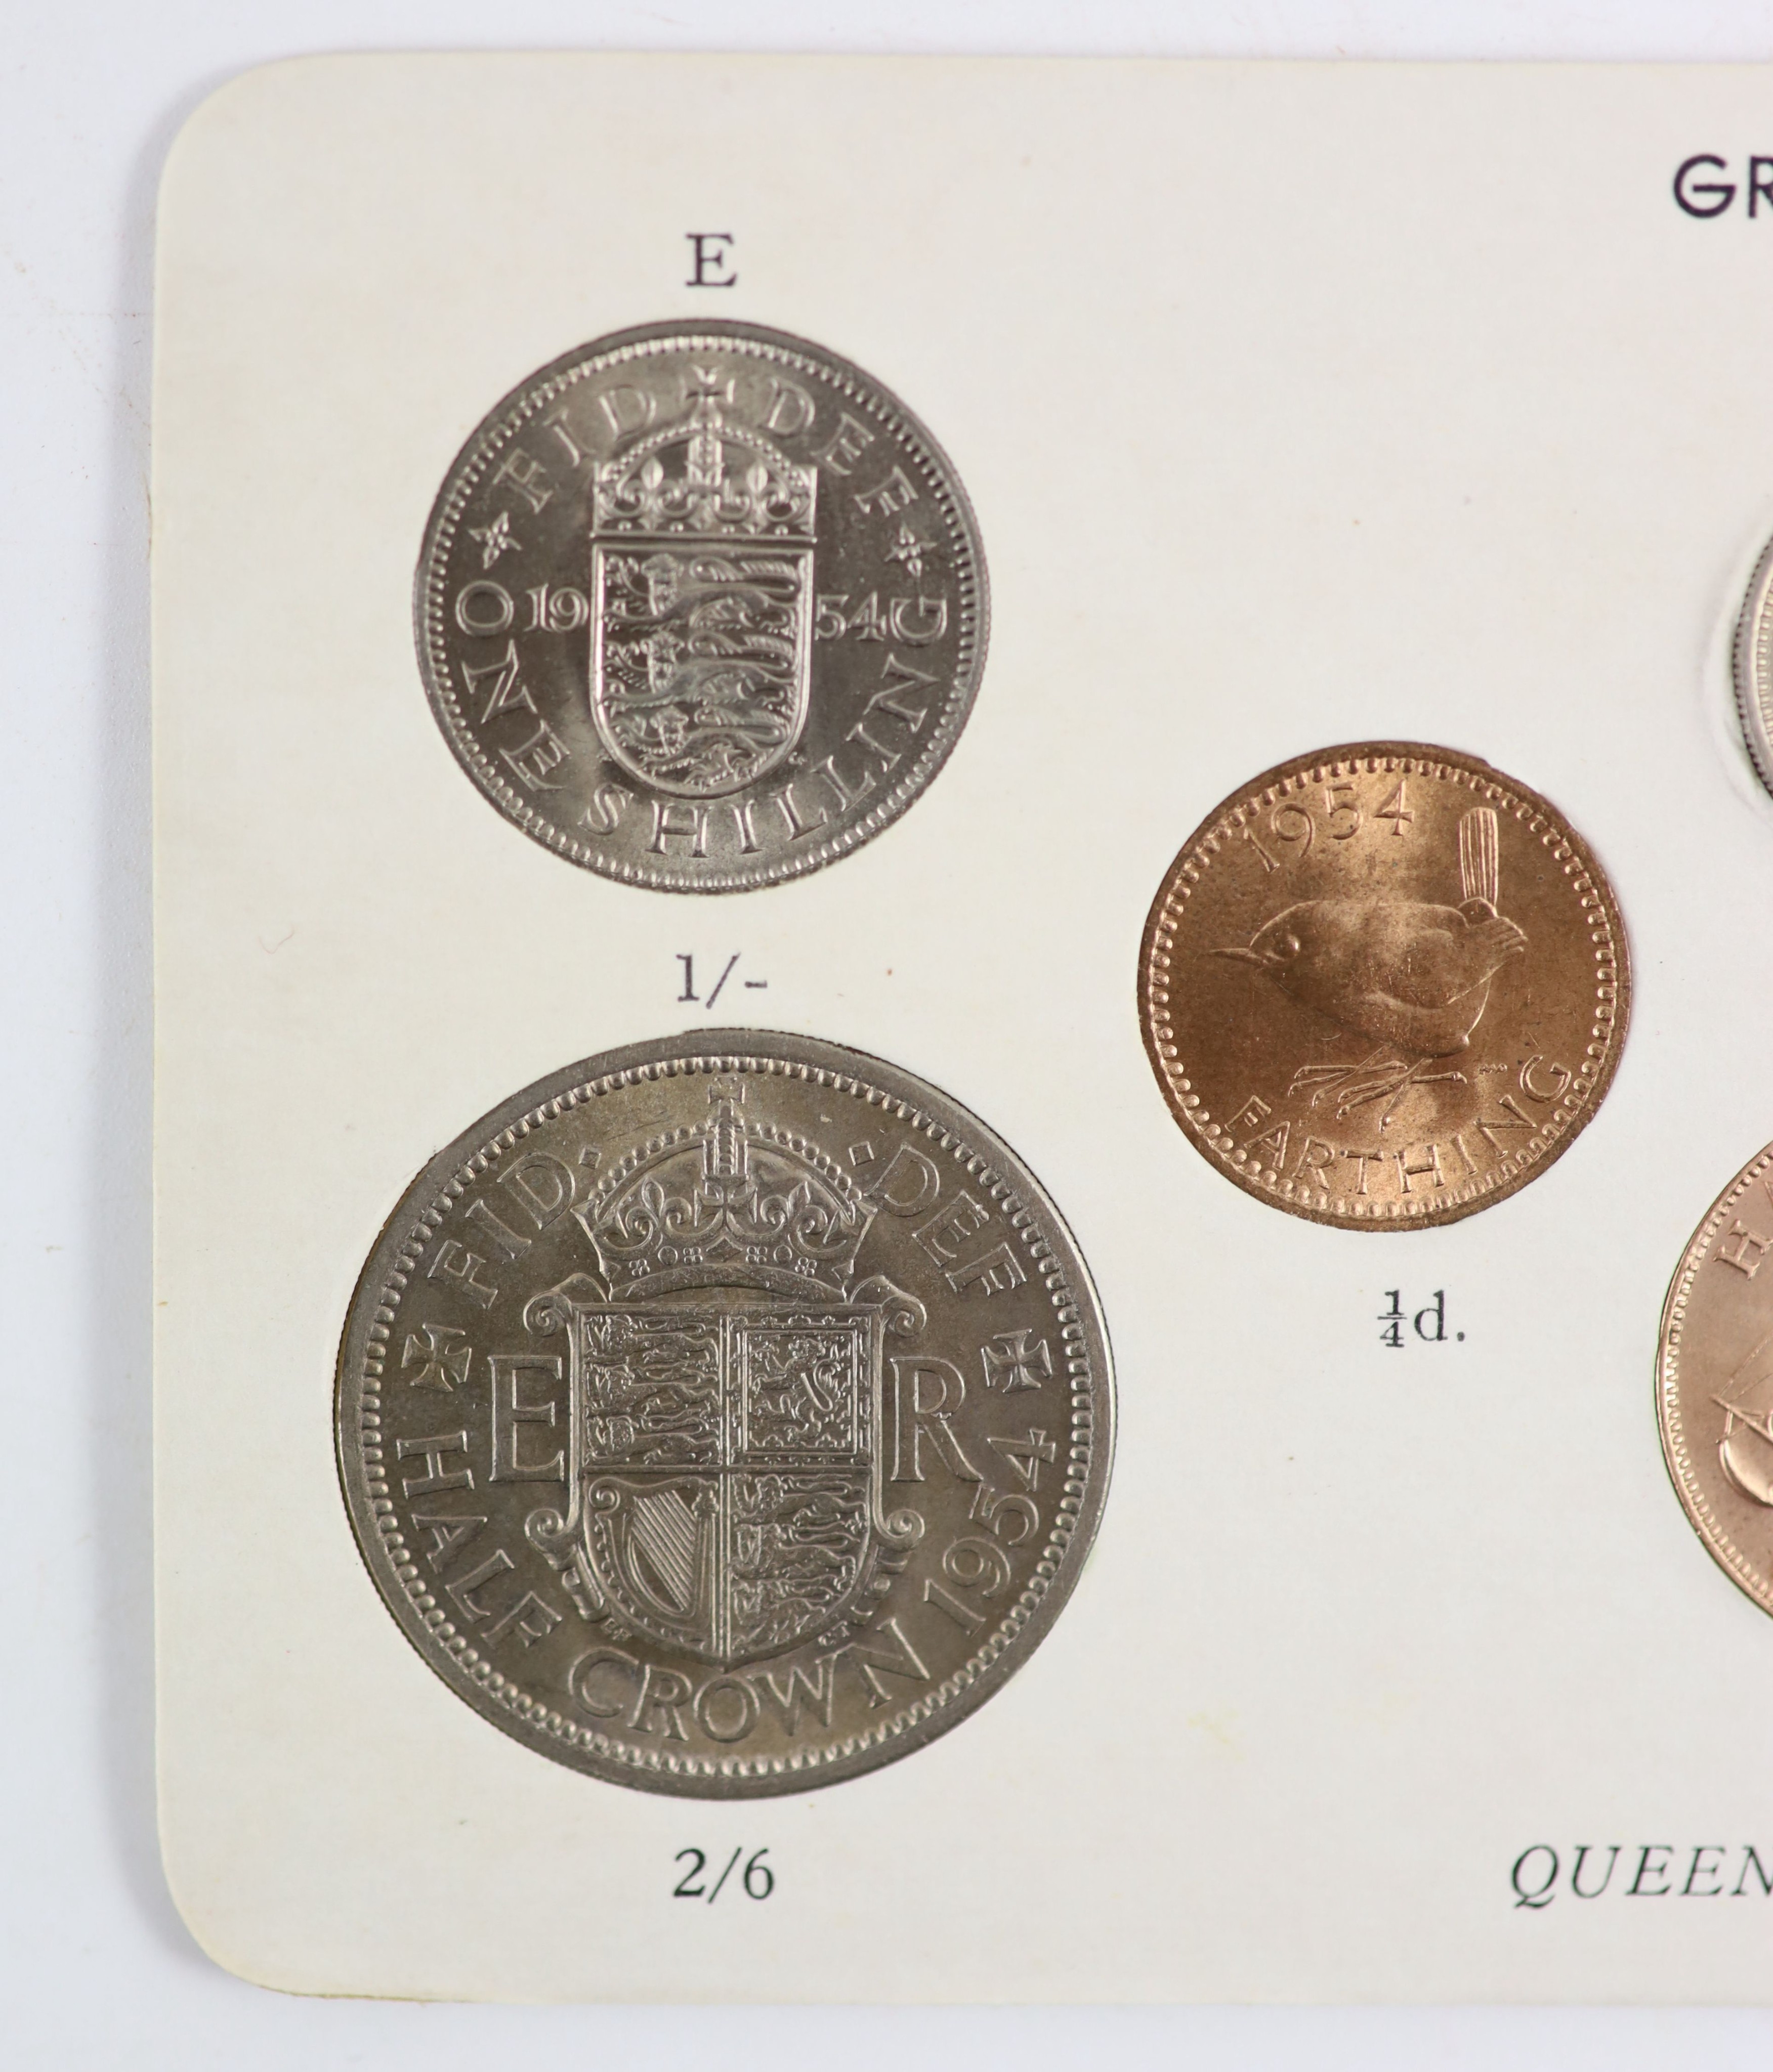 Queen Elizabeth II pre-decimal specimen coin sets for 1953 - 1967, first and second issues, all EF/ - Image 24 of 34